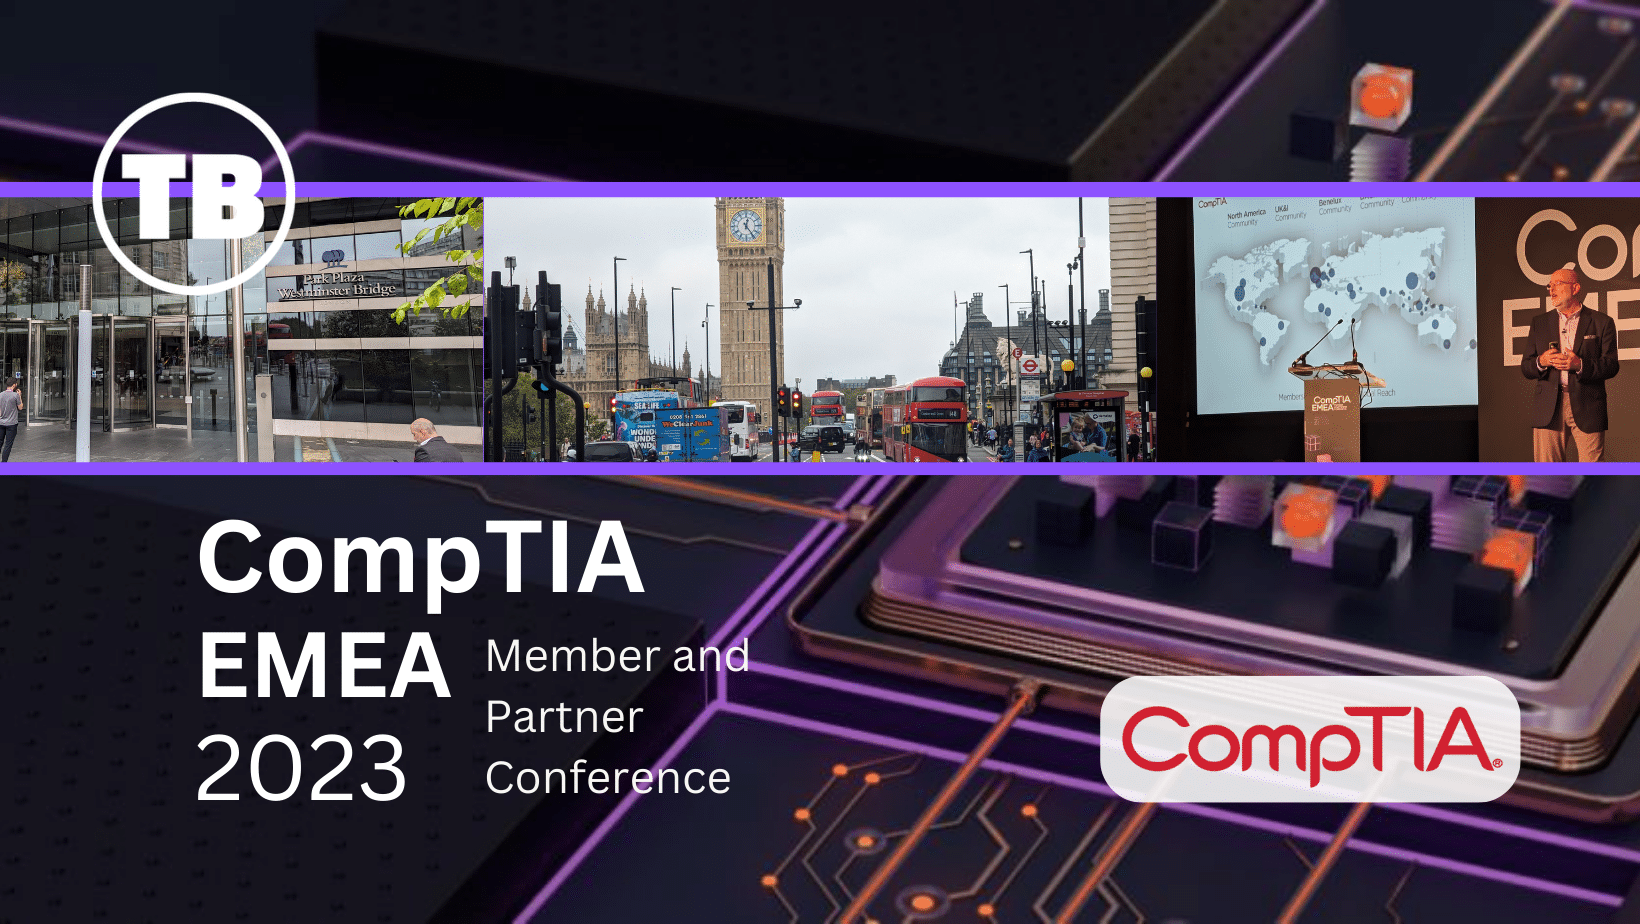 Security, Sales and Leadership Trends Led the Way at CompTIA EMEACon 2023 image